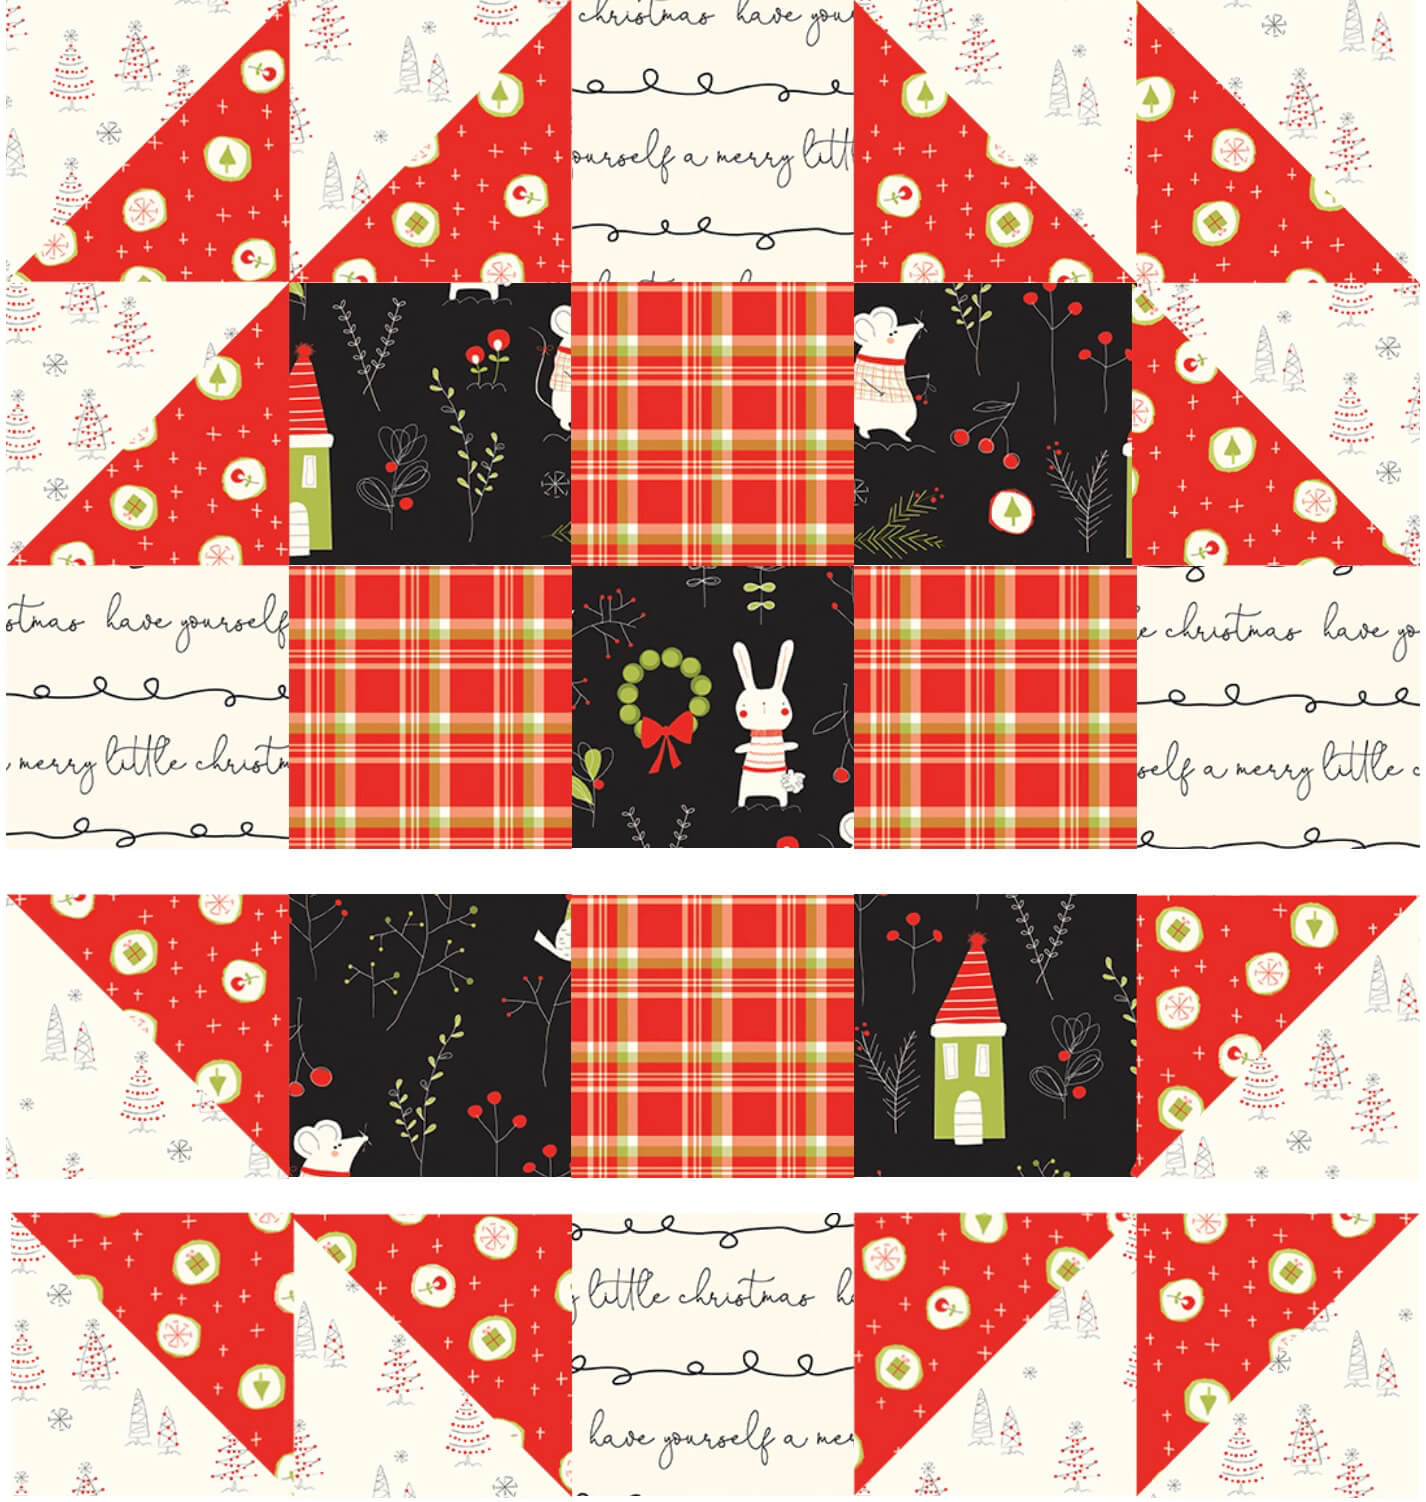 October 2021 NZP Block of the Month: English Wedding Ring Quilt Block